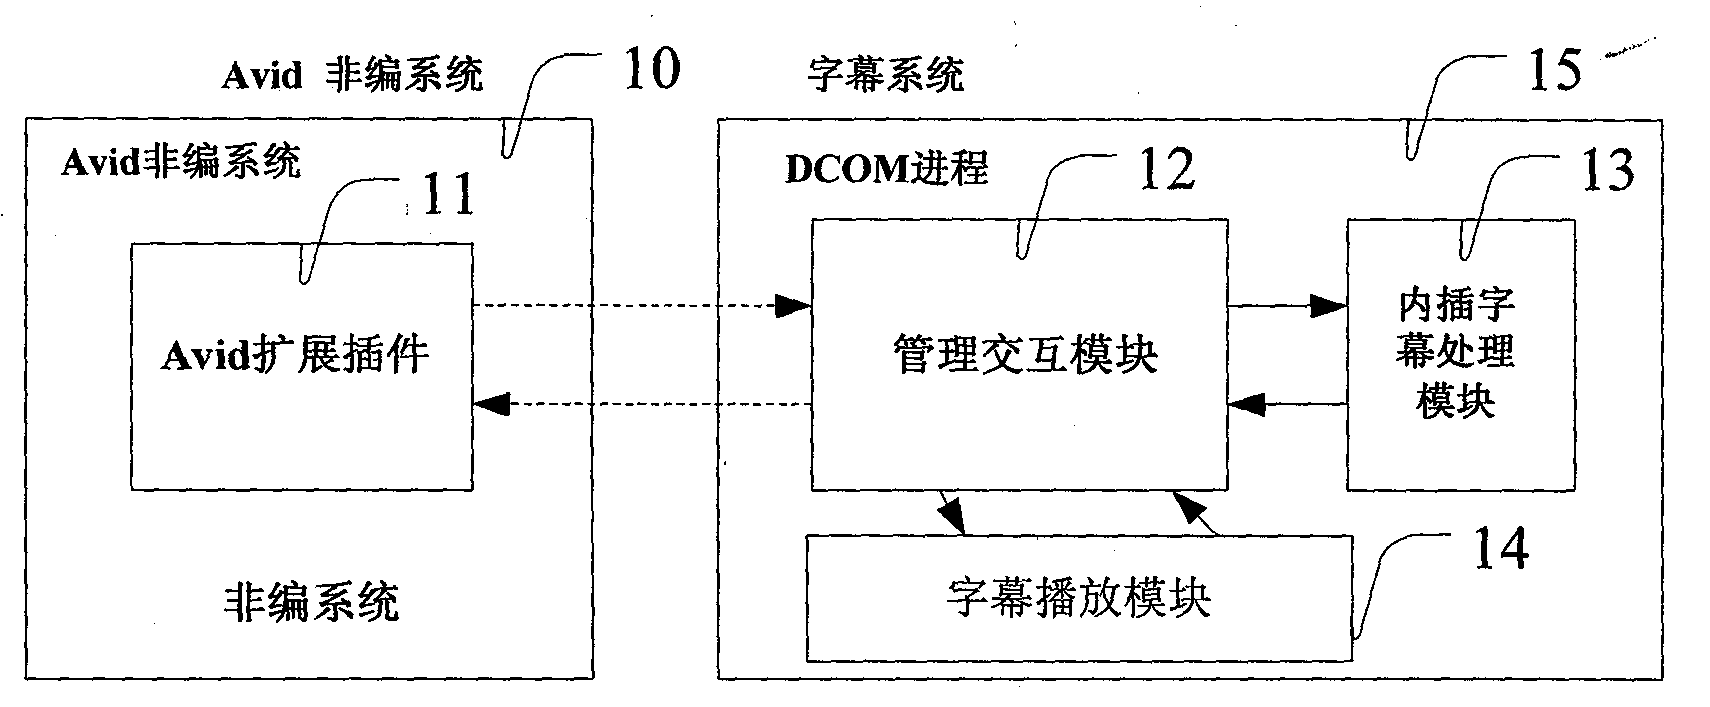 Subtitle system and method for managing distributed component object model (DCOM)